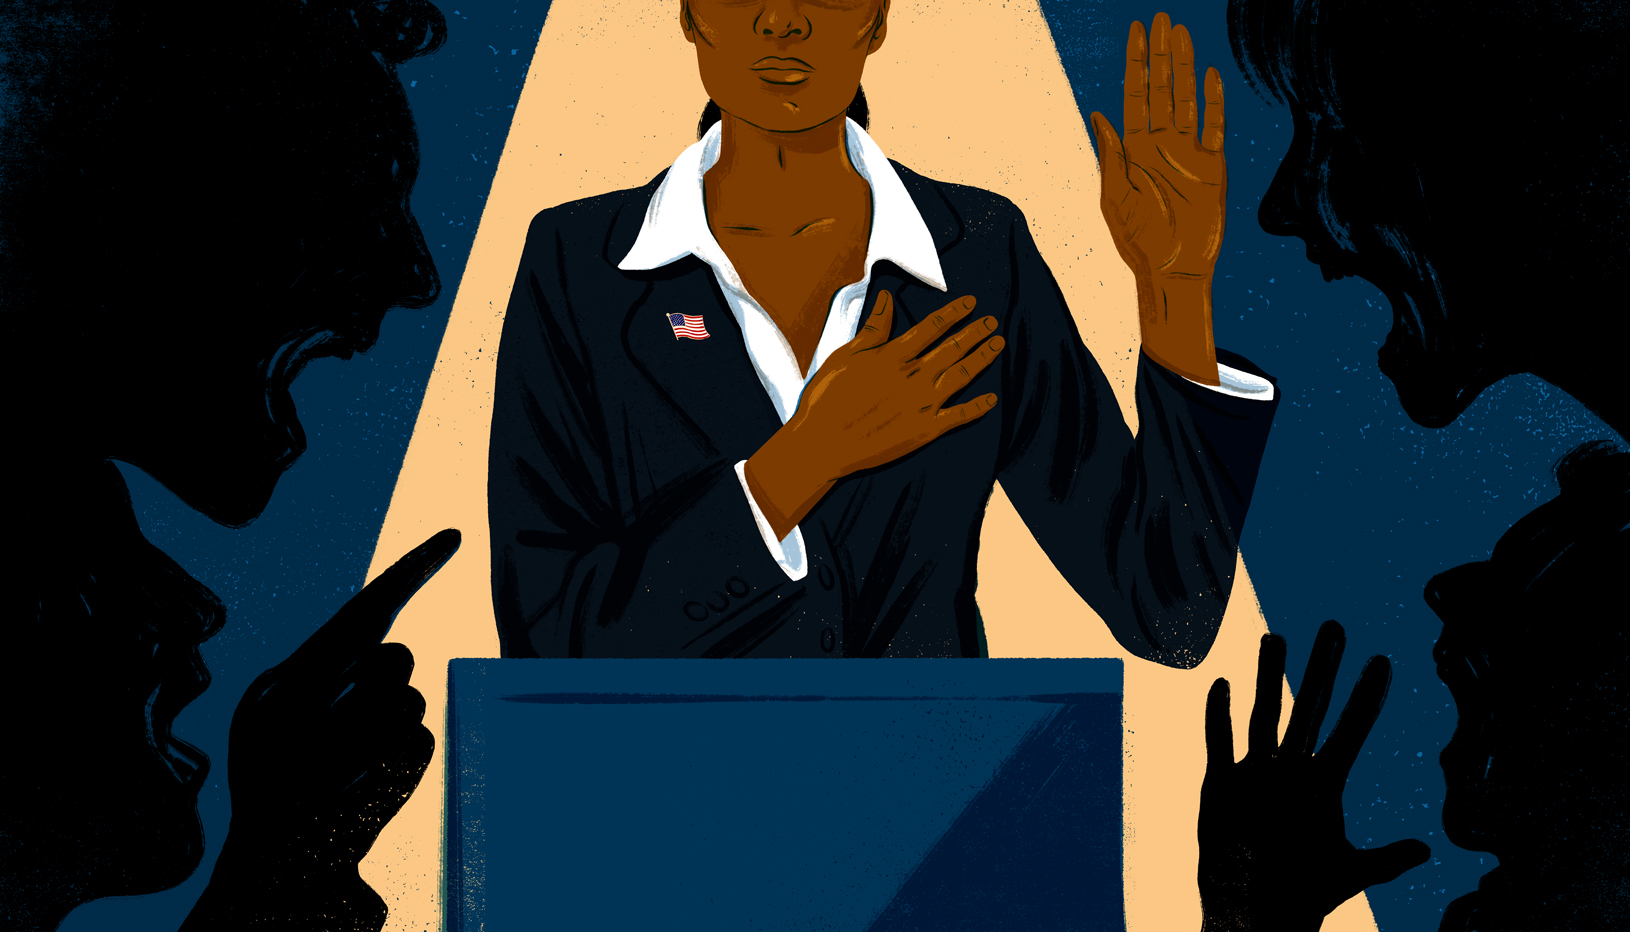 Illustration of an officeholder taking an oath of office surrounded by the silhouettes of people yelling.